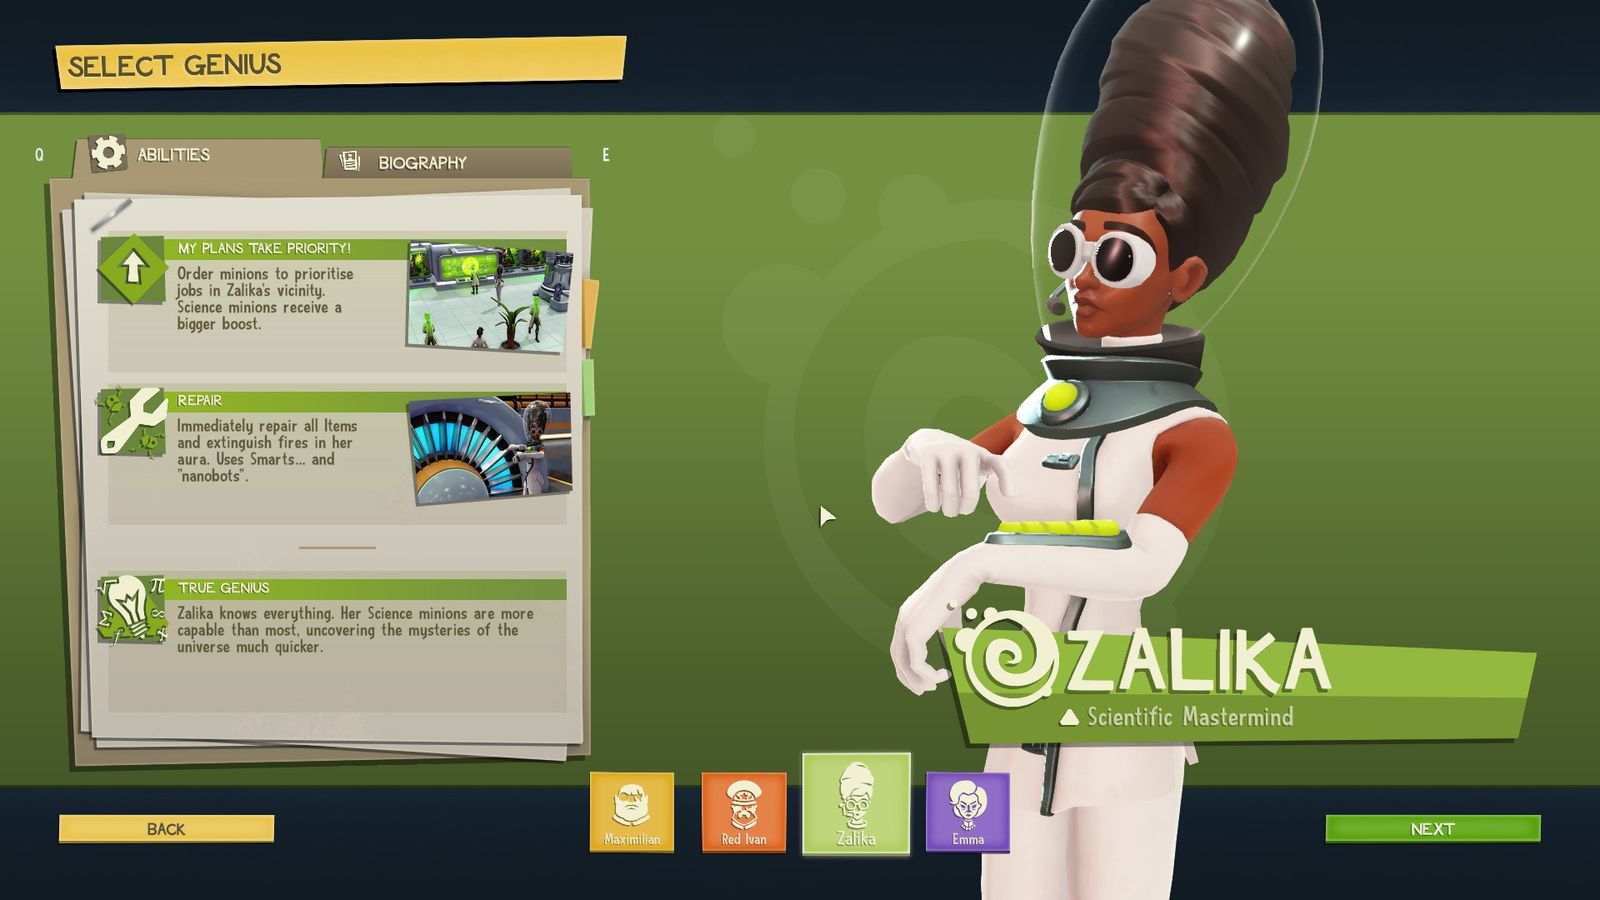 An image showing one of the four Geniuses in Evil Genius 2. This is Zalika, who focuses on science.